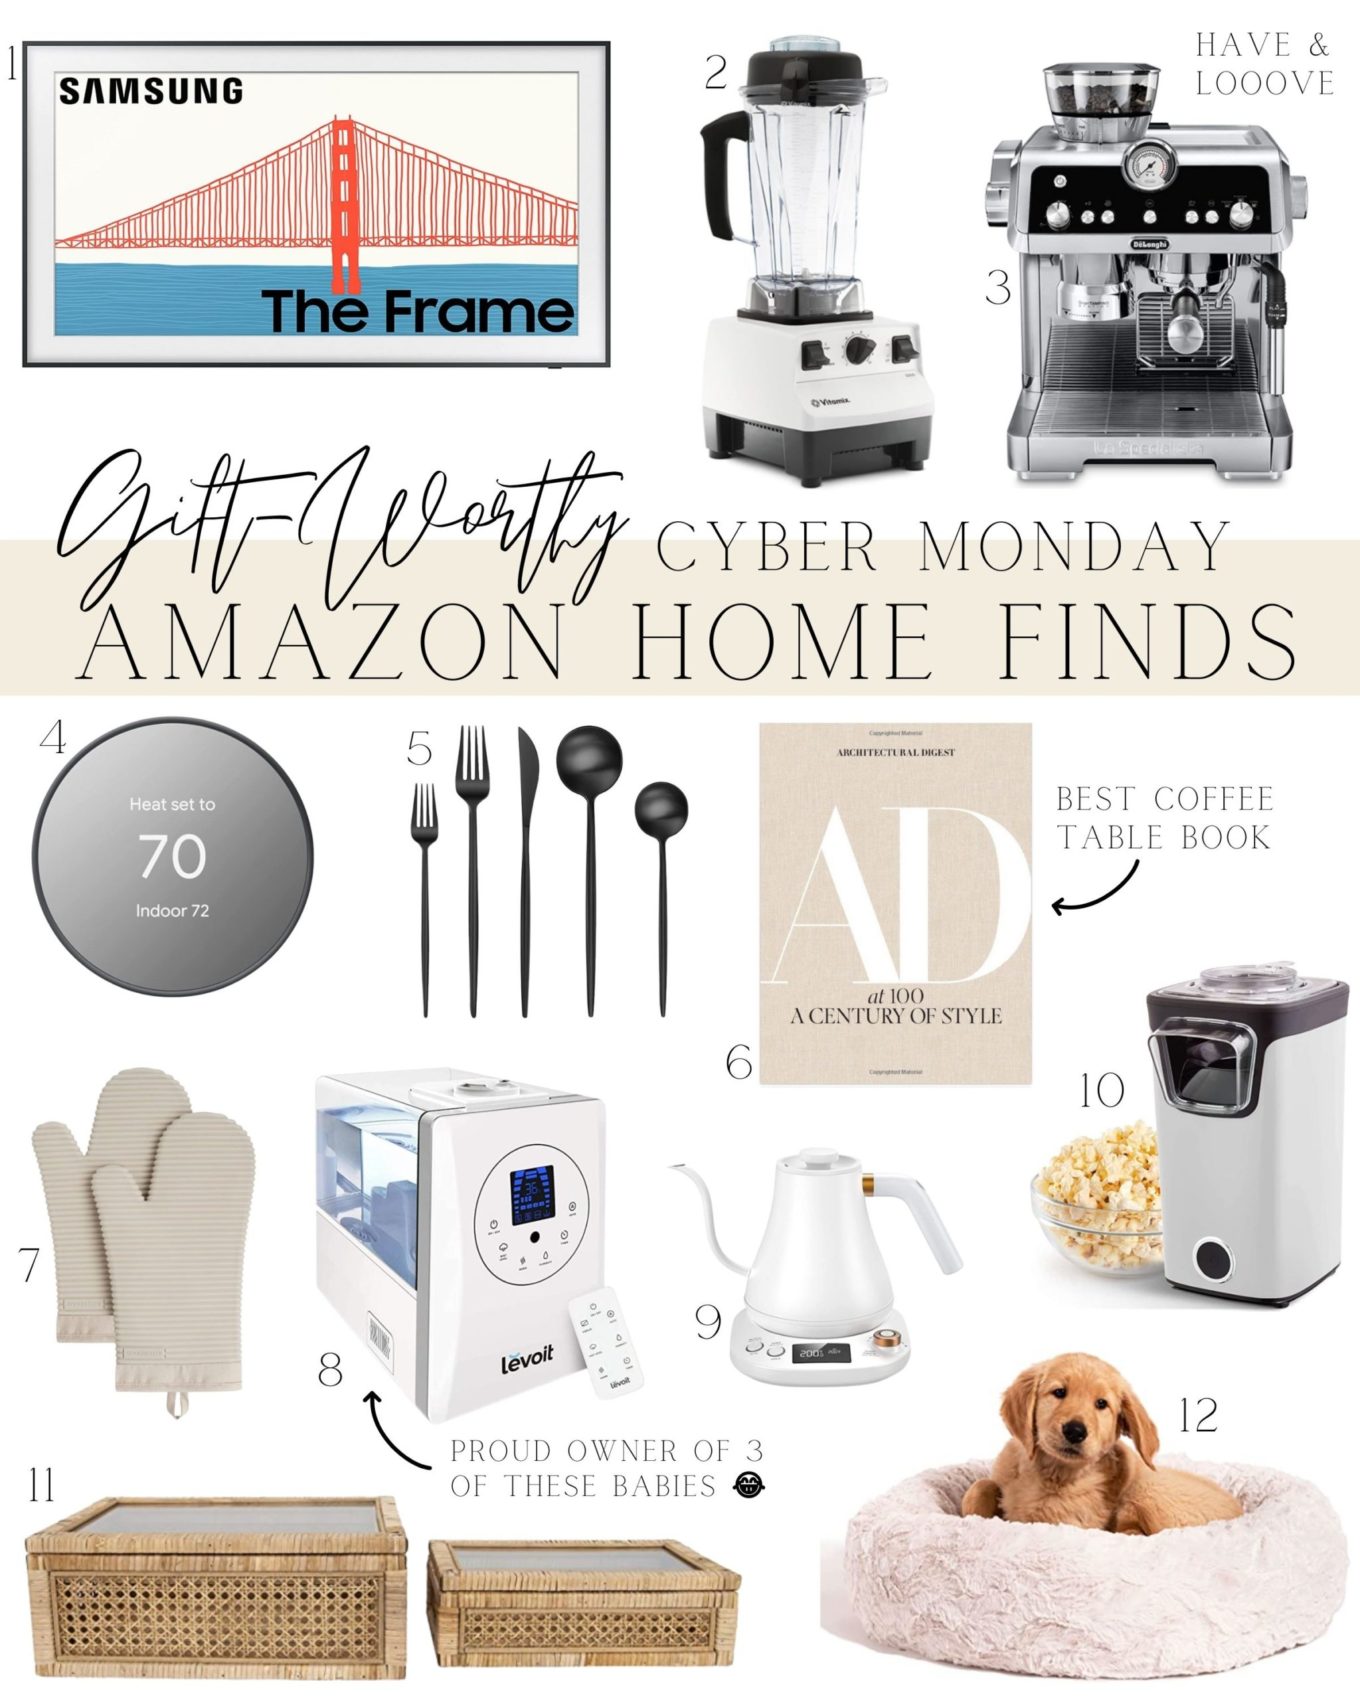 cyber Monday, Cyber Monday, Amazon home finds, home finds, home, sale, home items sale, humidifier, dog bed, coffee table book, coffee machine, Samsung the frame TV, flatware